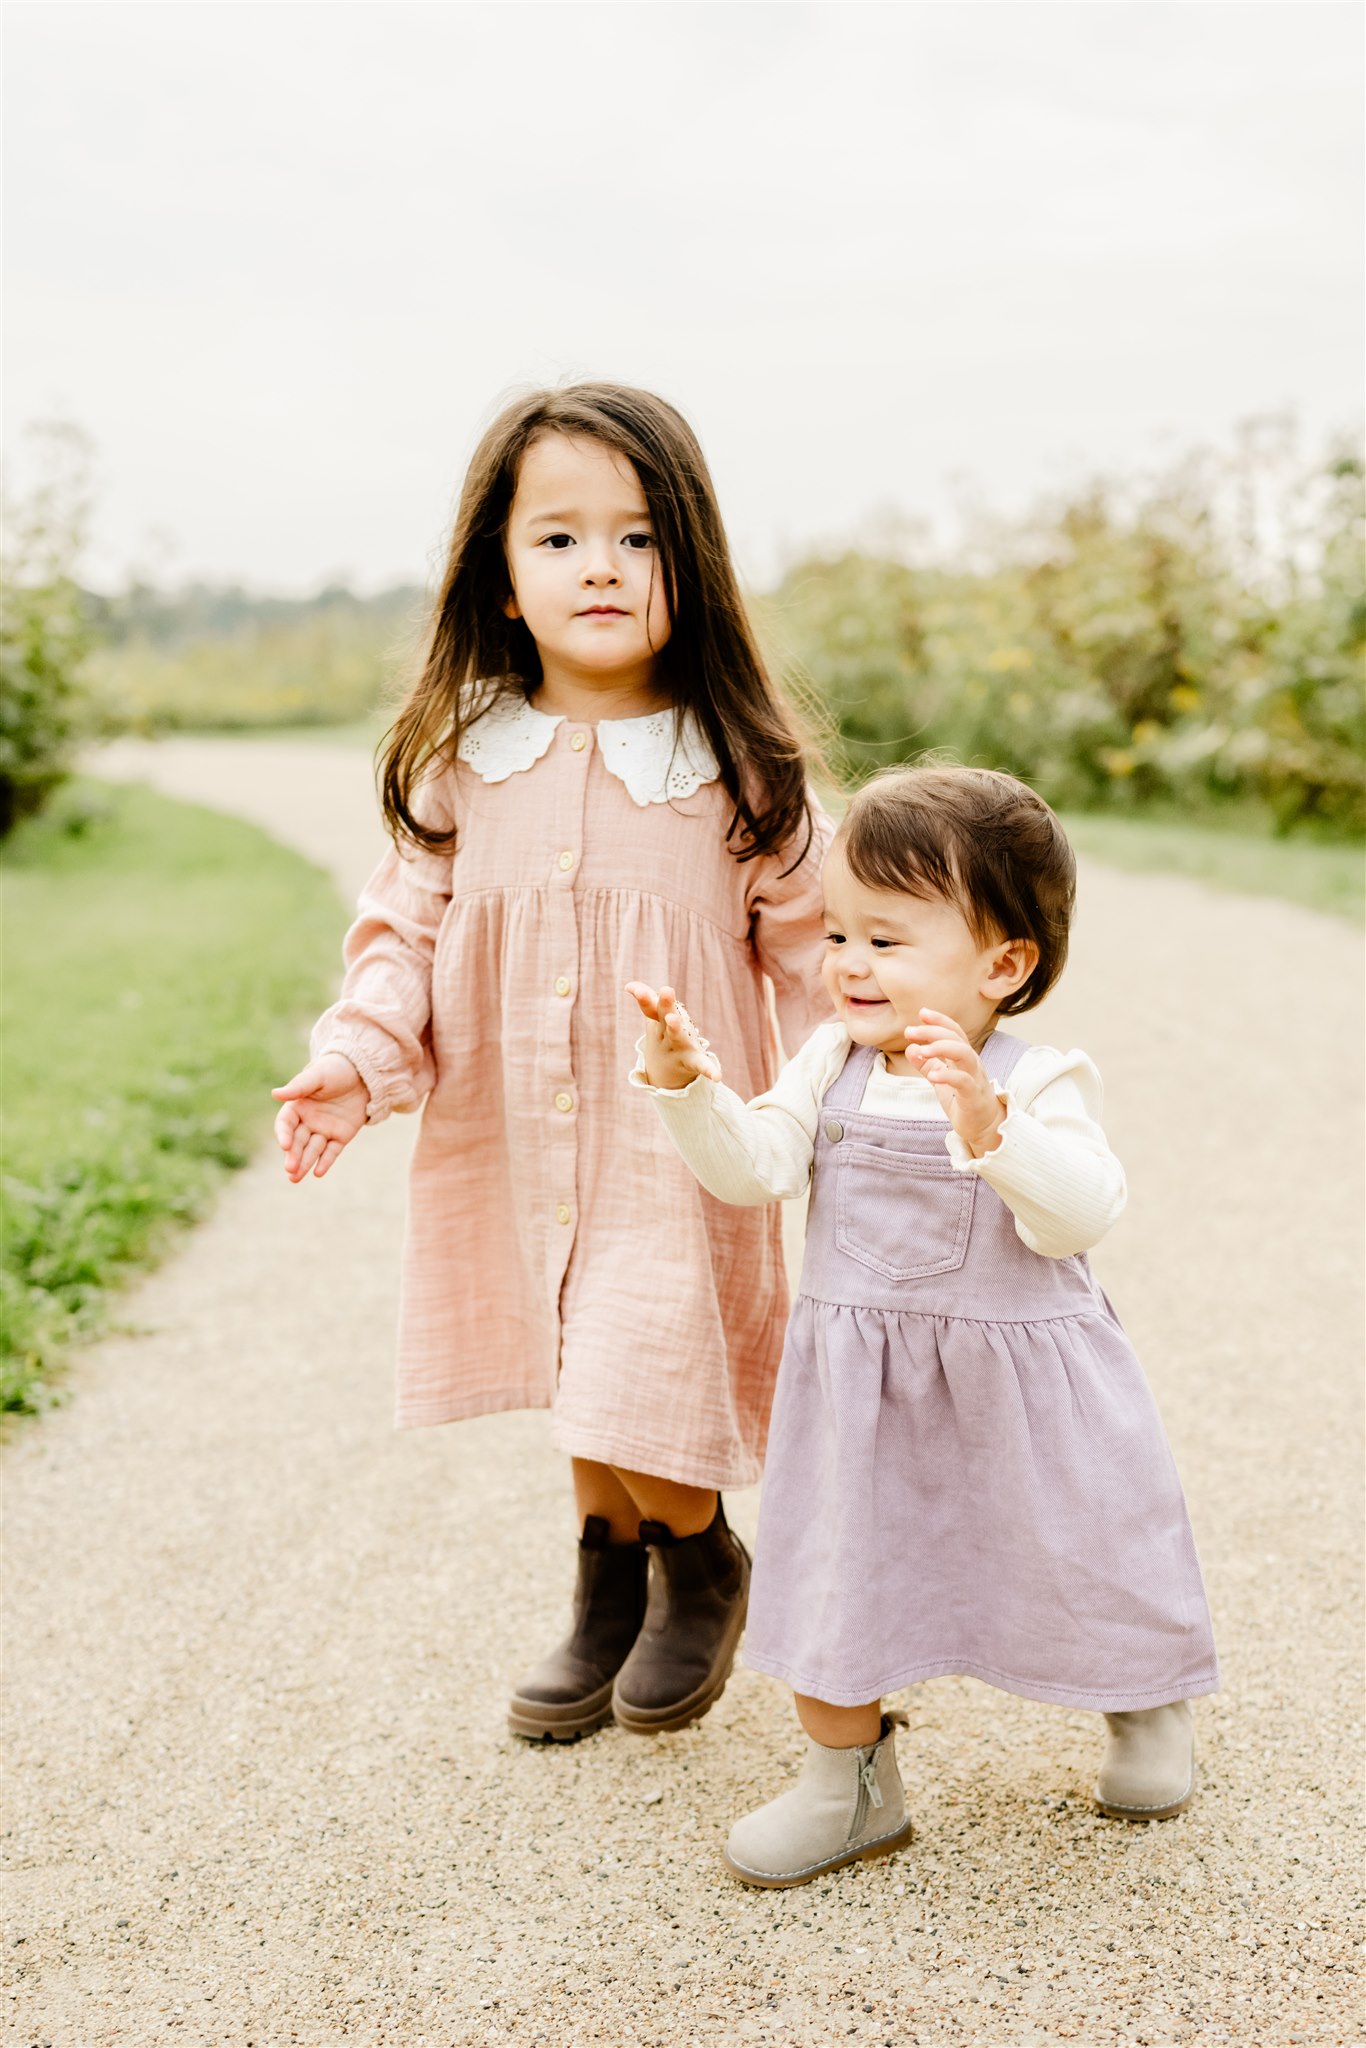 Two toddler girls in dresses walk through a park path before visiting Famous Churches in Chicago